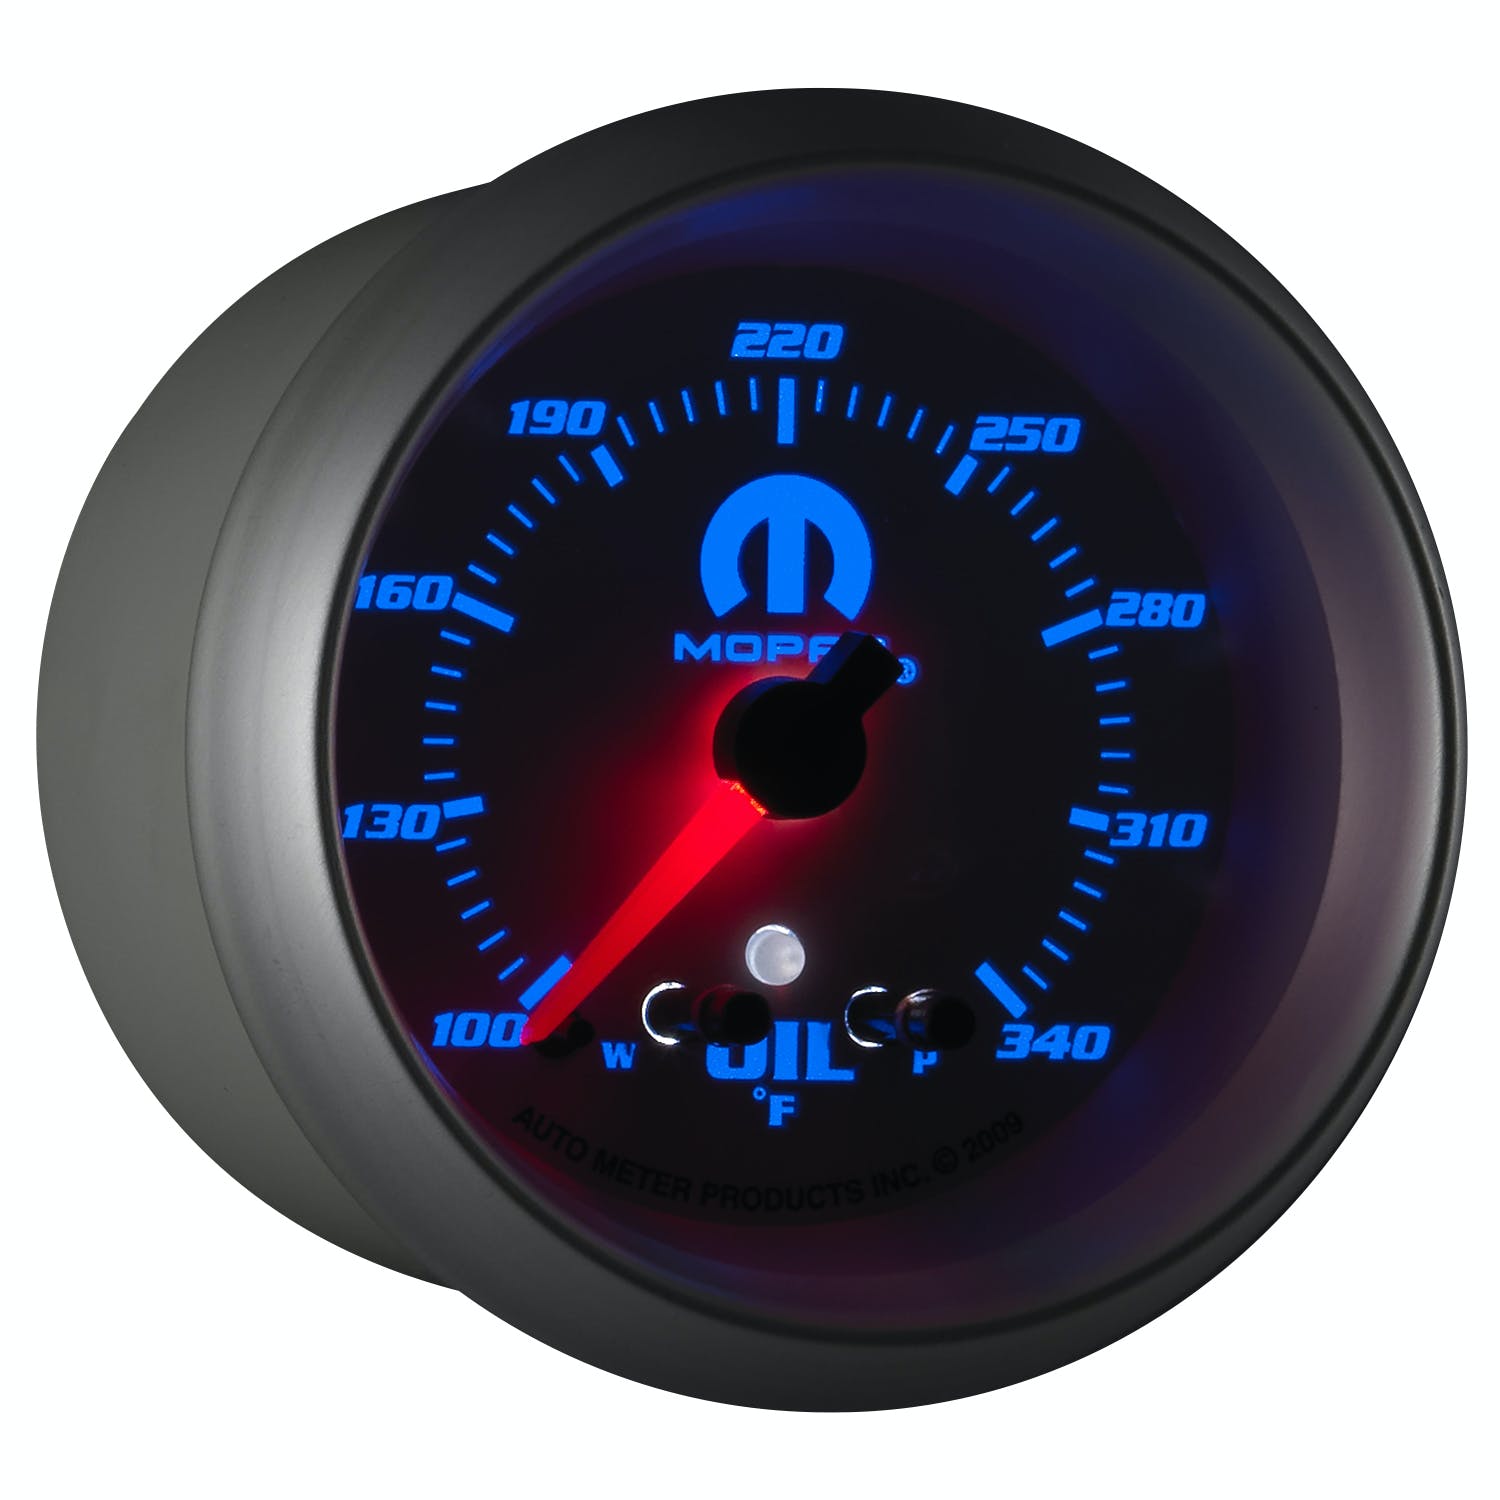 AutoMeter Products 880251 MOPAR Electric Oil Temperature Gauge 2 5/8 in. 140 - 340 Deg. F Full Sweep